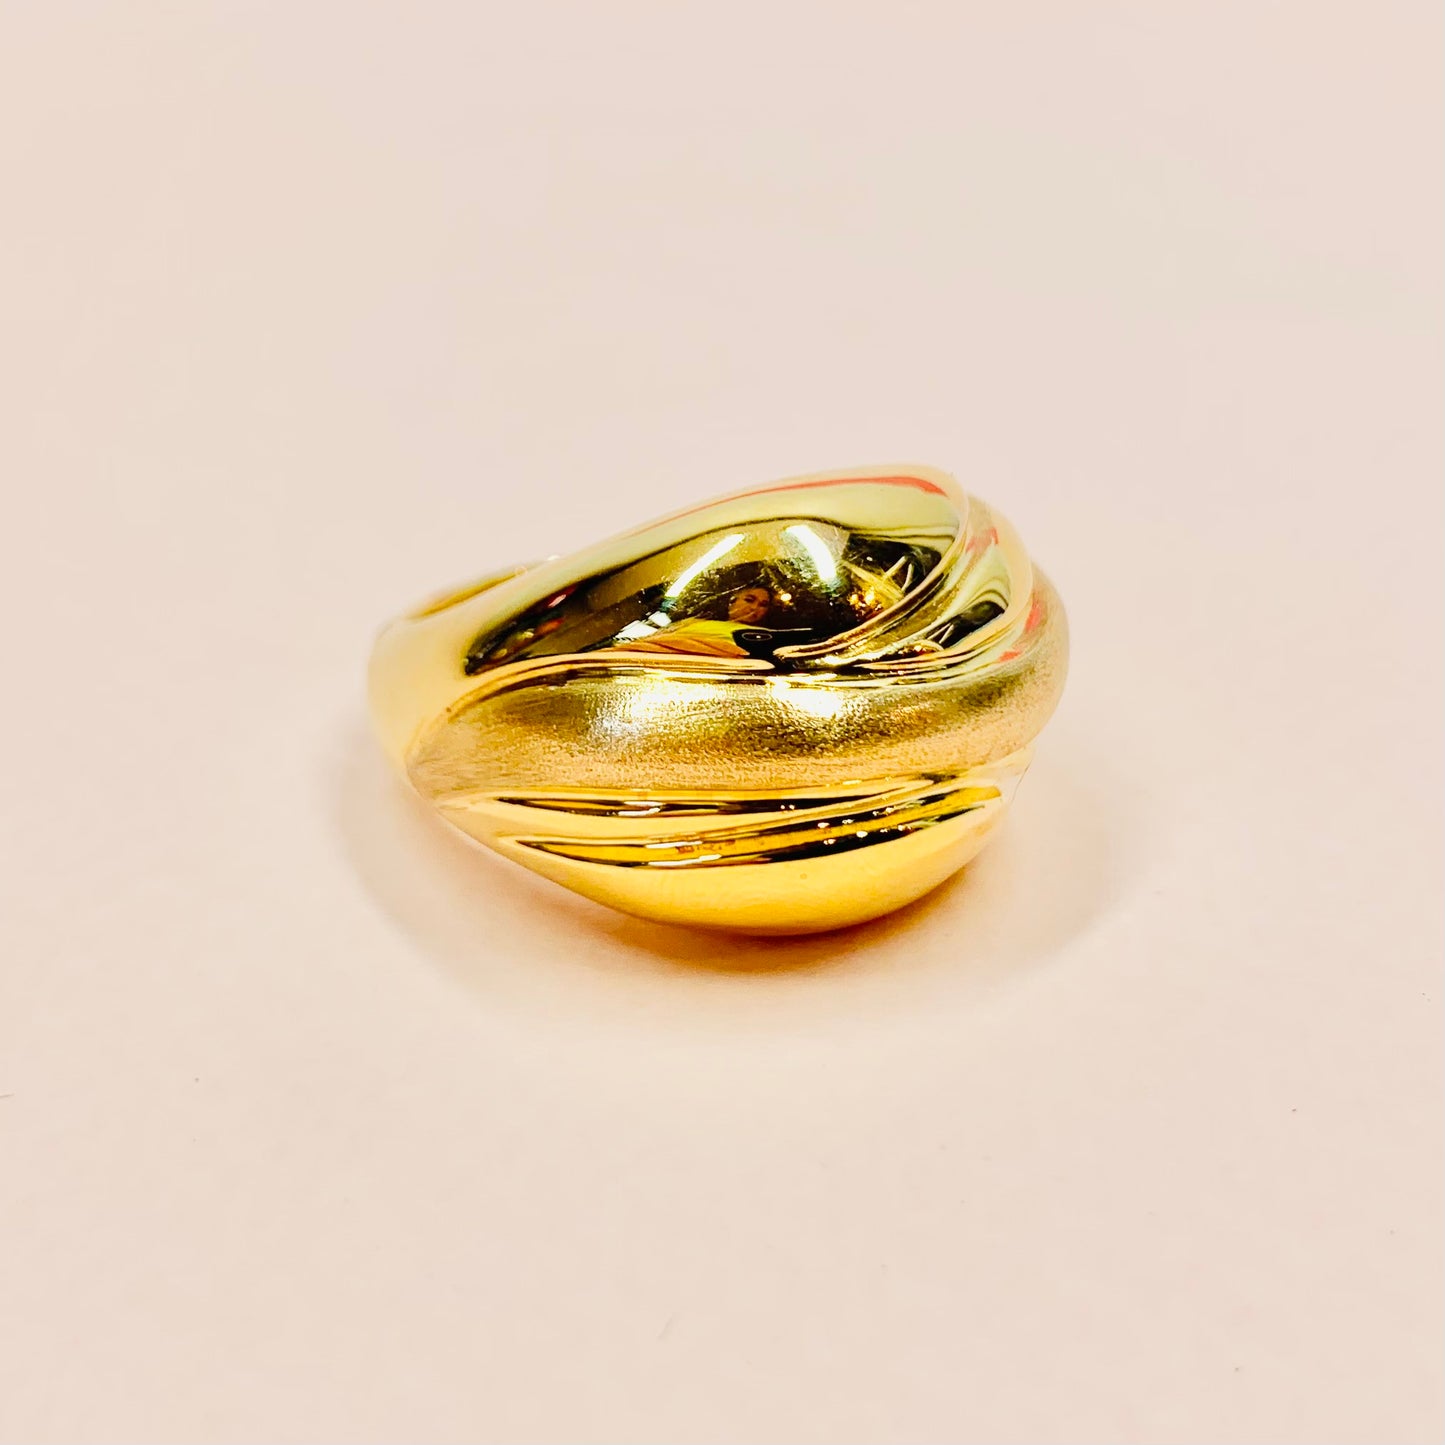 Modernist 1950s Italian 14K gold scrolled dome ring